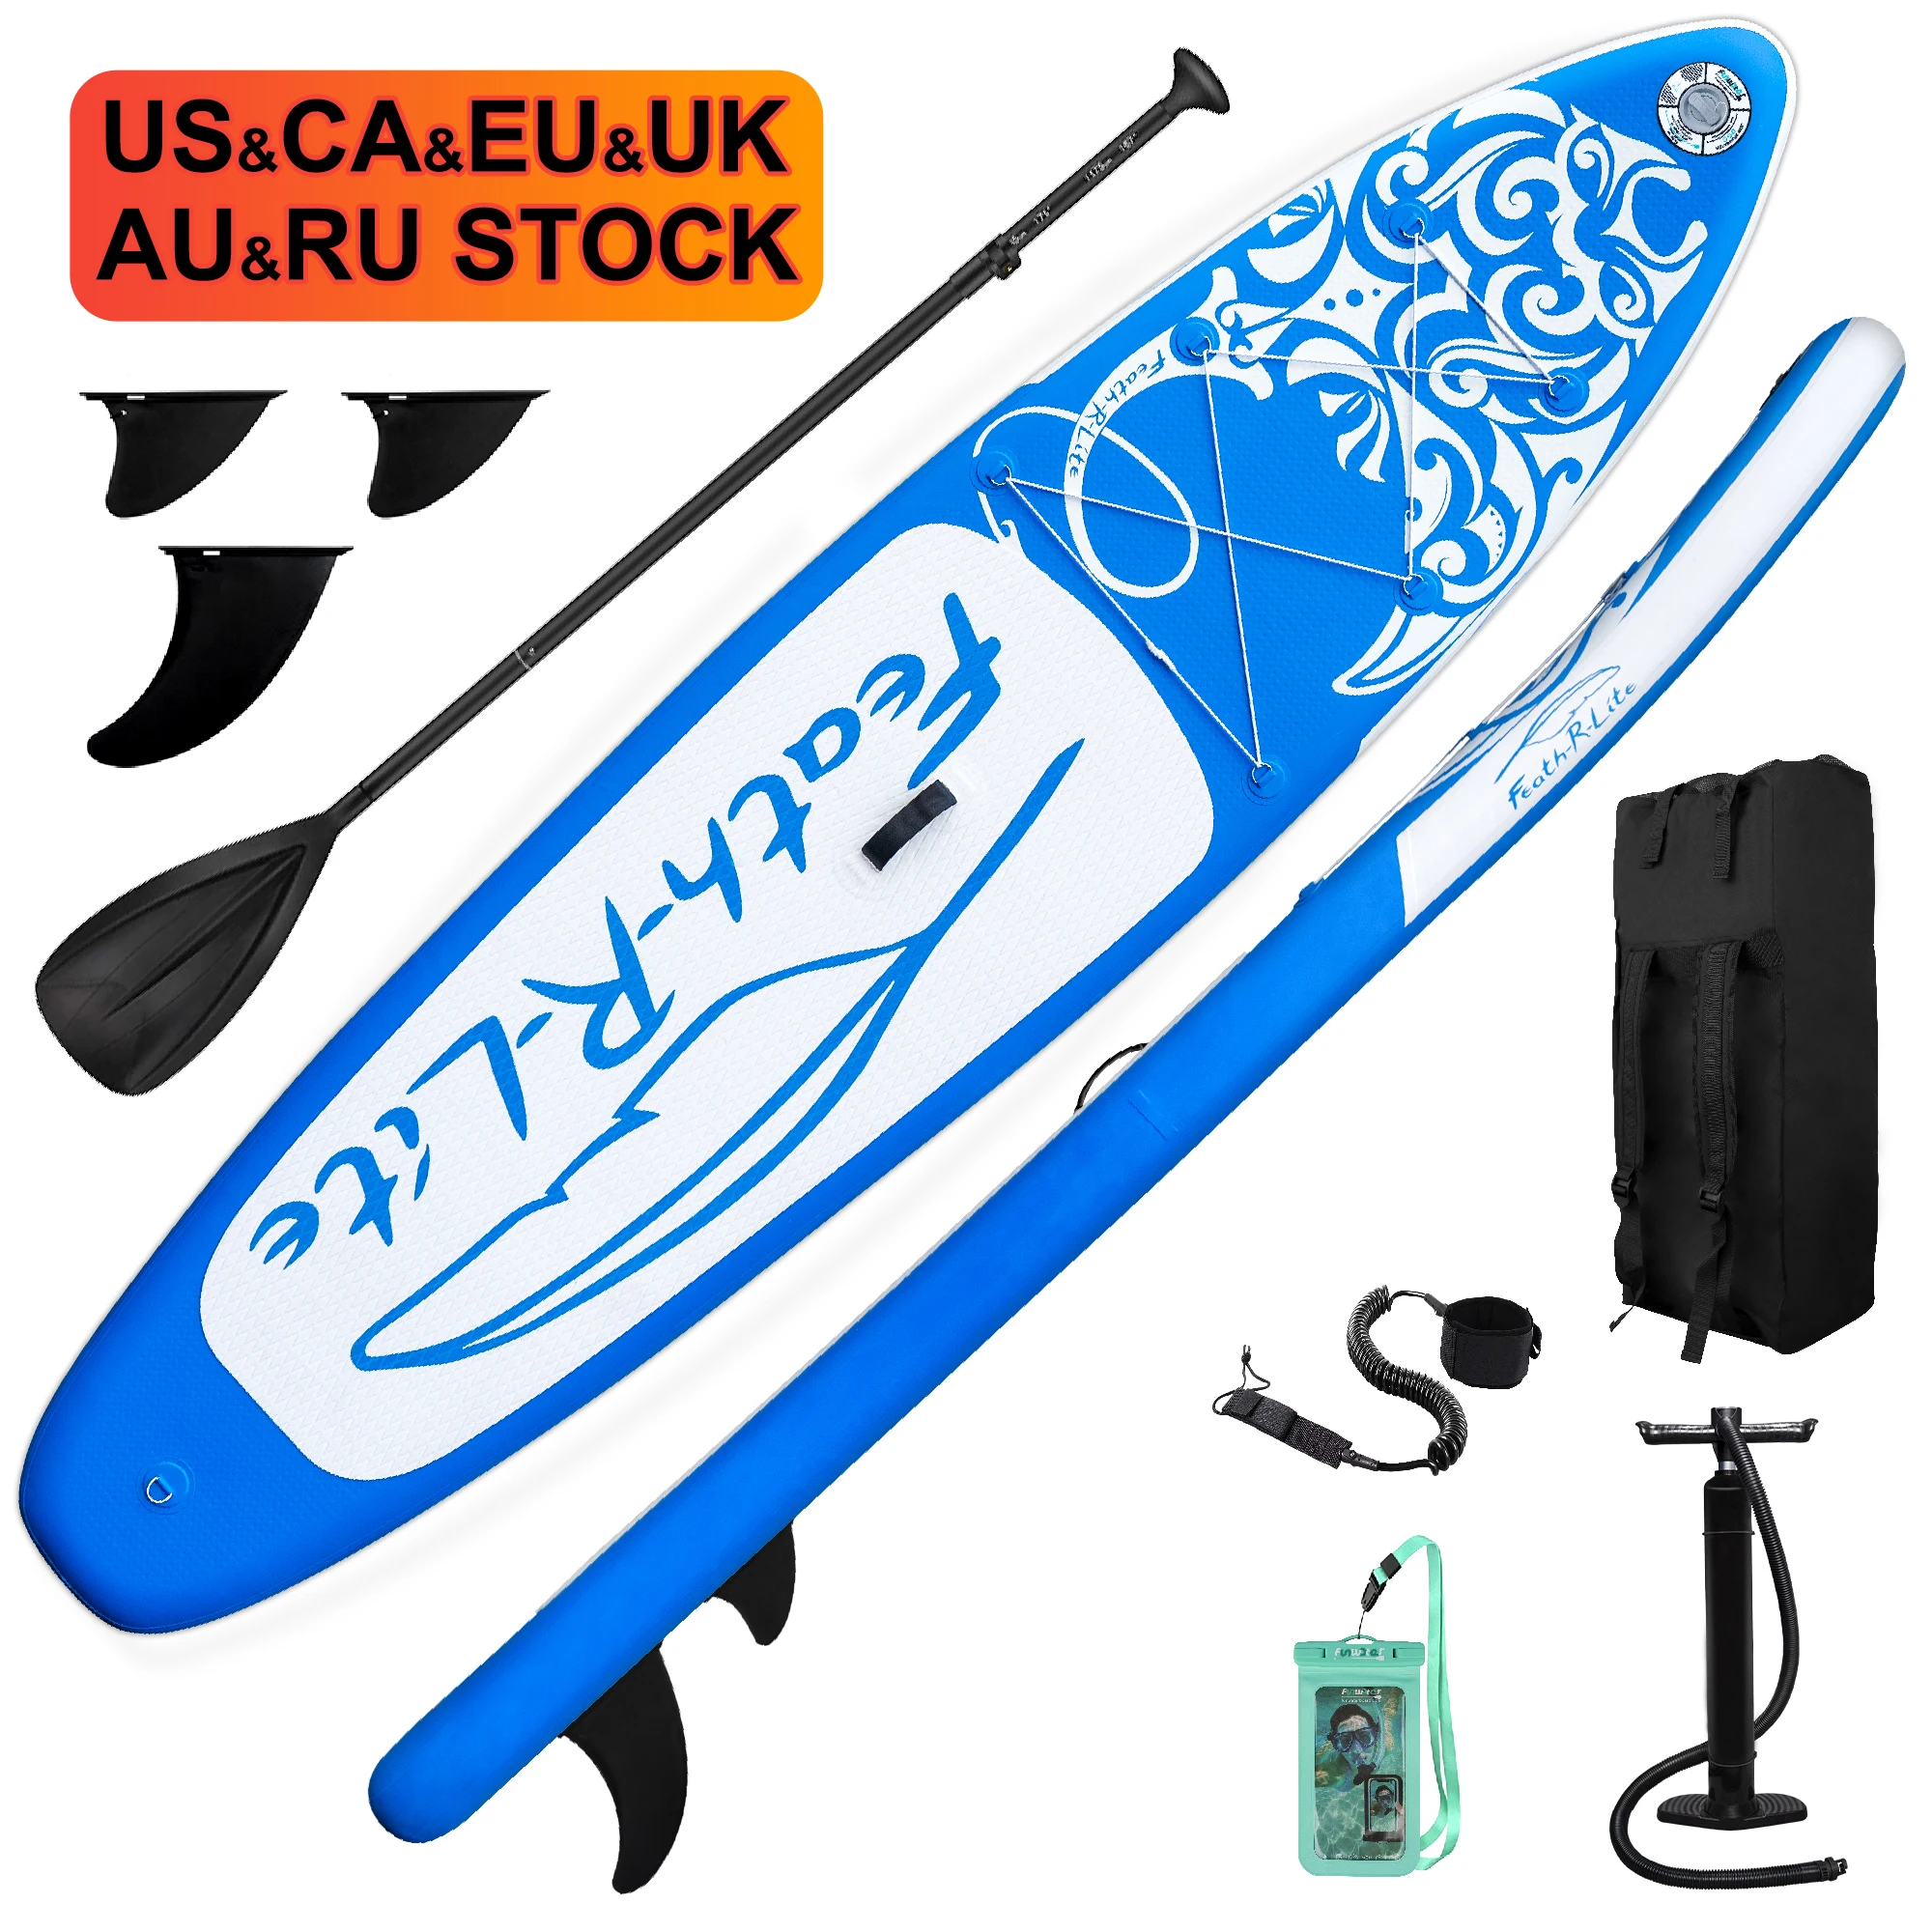 

FUNWATER Dropshipping OEM Wholesale 10'6" sup board inflatable sup paddle board stand up paddle board surfboard waterplay surf